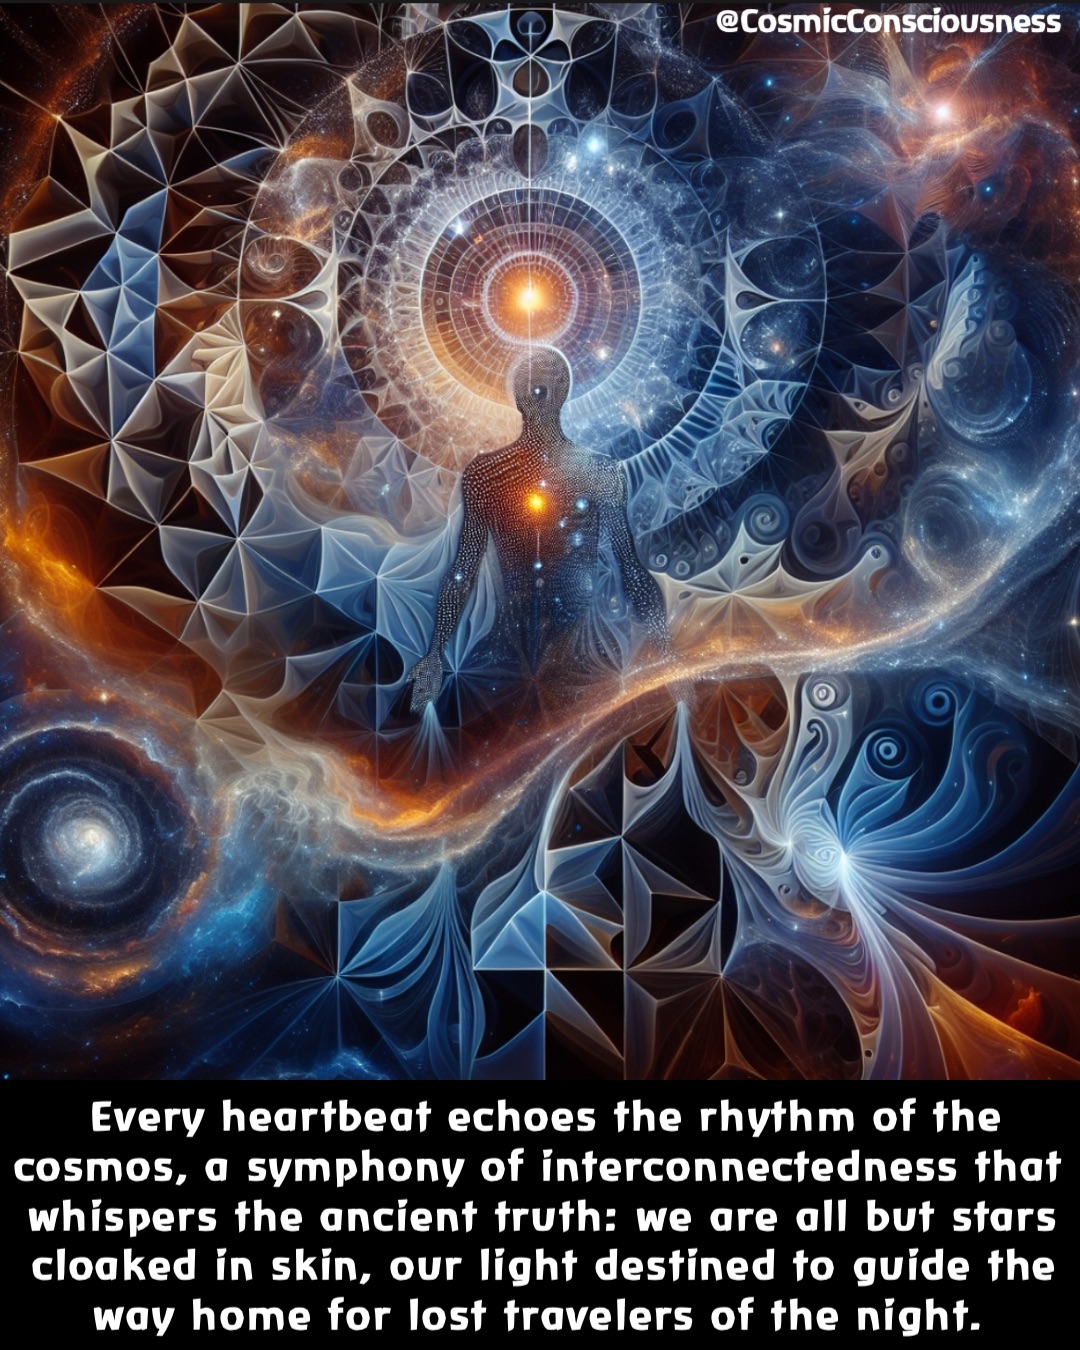 Every heartbeat echoes the rhythm of the cosmos, a symphony of interconnectedness that whispers the ancient truth: we are all but stars cloaked in skin, our light destined to guide the way home for lost travelers of the night. @CosmicConsciousness